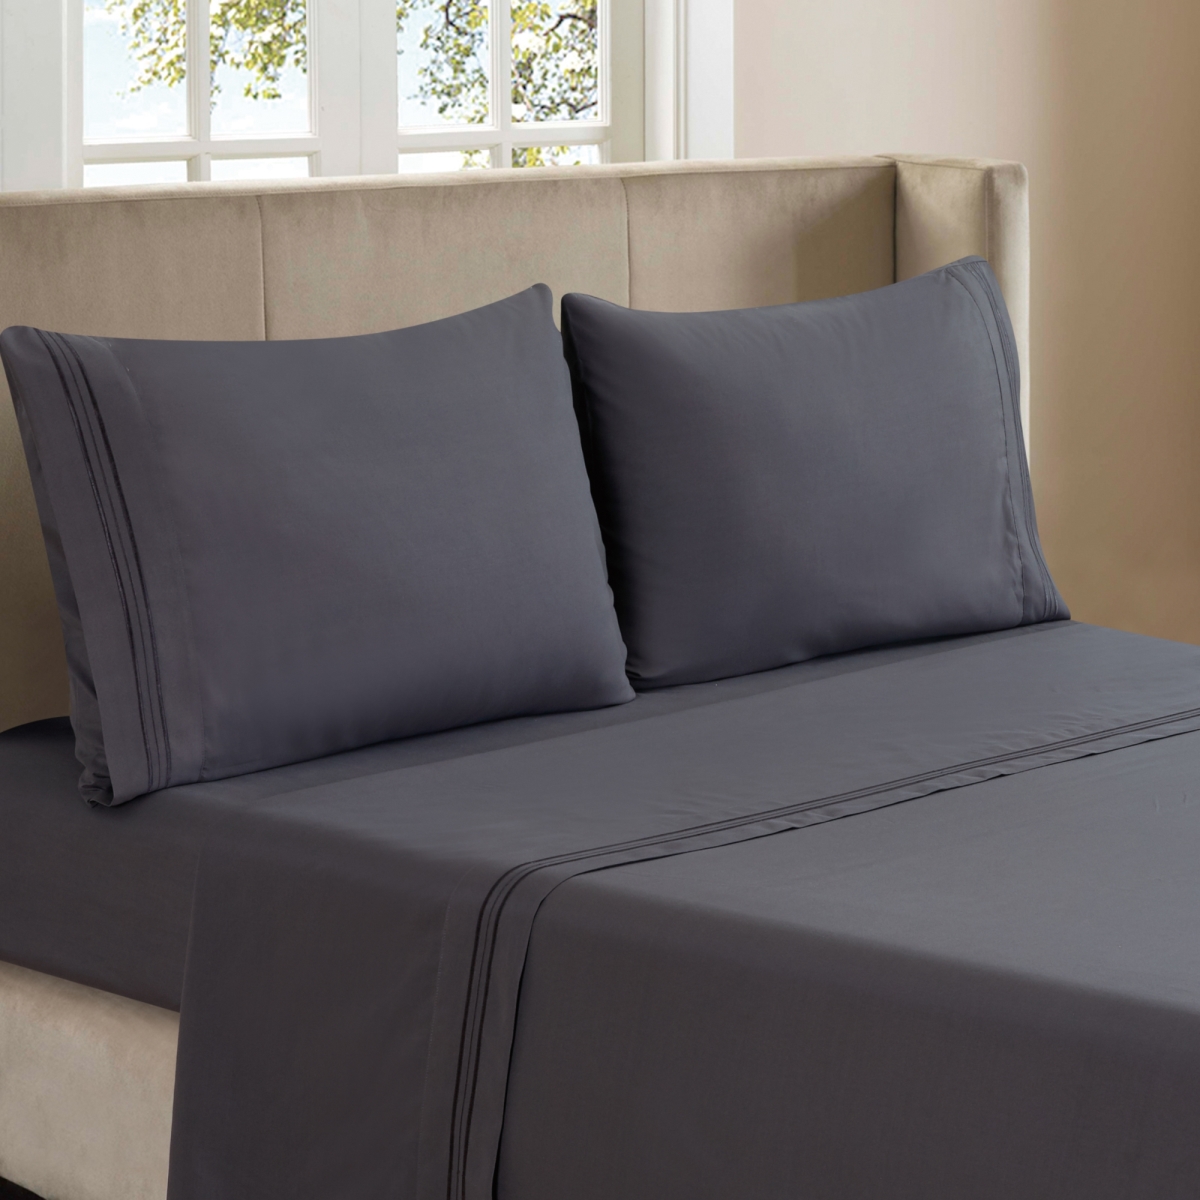 Whtx607-gyq 3-line Embroidered Grey Polyester Sheet Set - Queen Size - 4 Piece